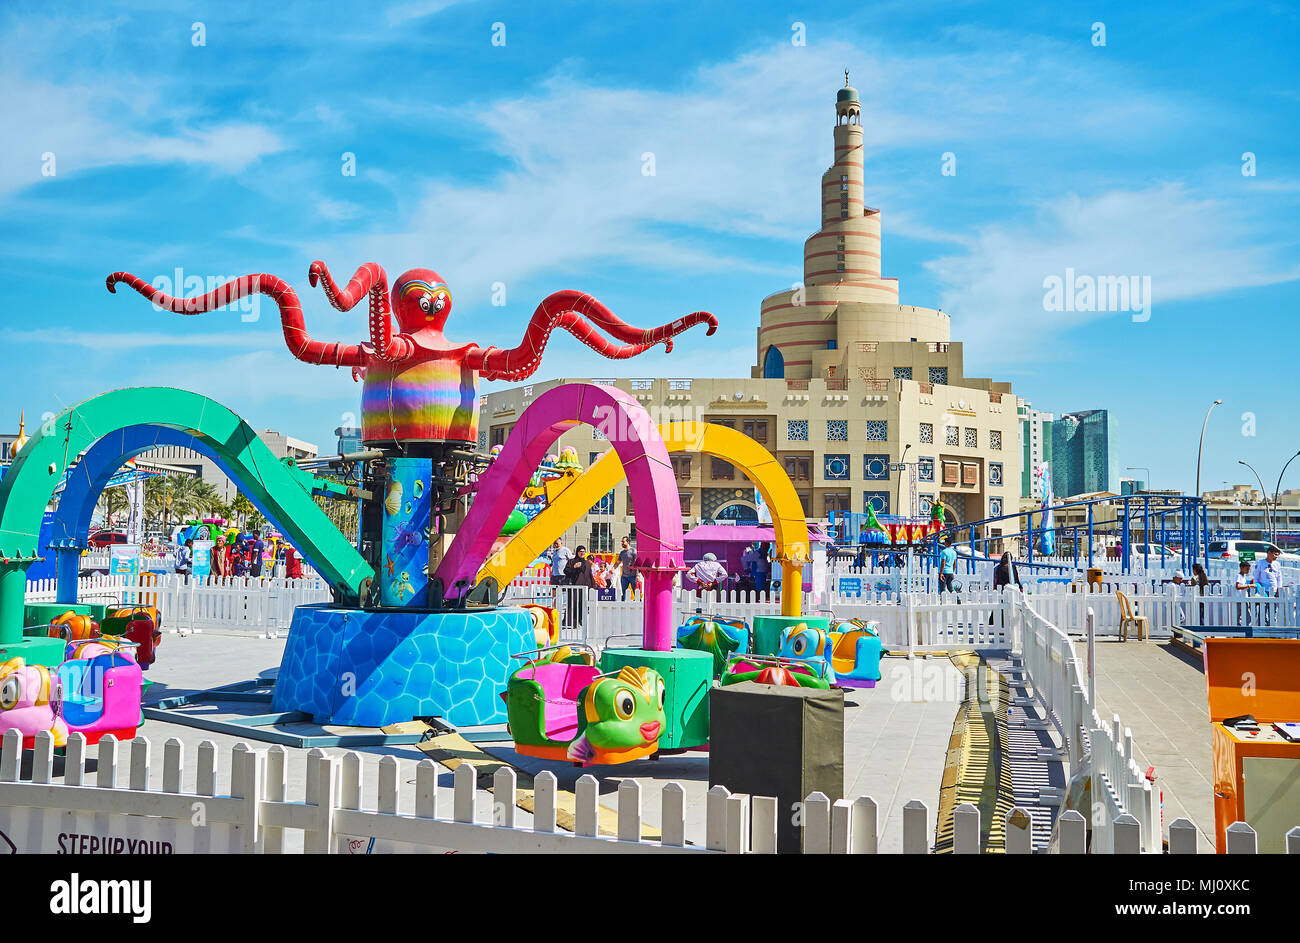 DOHA, QATAR - FEBRUARY 13, 2018: The scenic amusement park for kids is neighboring with Souq Waqif and Fanar Mosque, famous for the beautiful spiral m Stock Photo